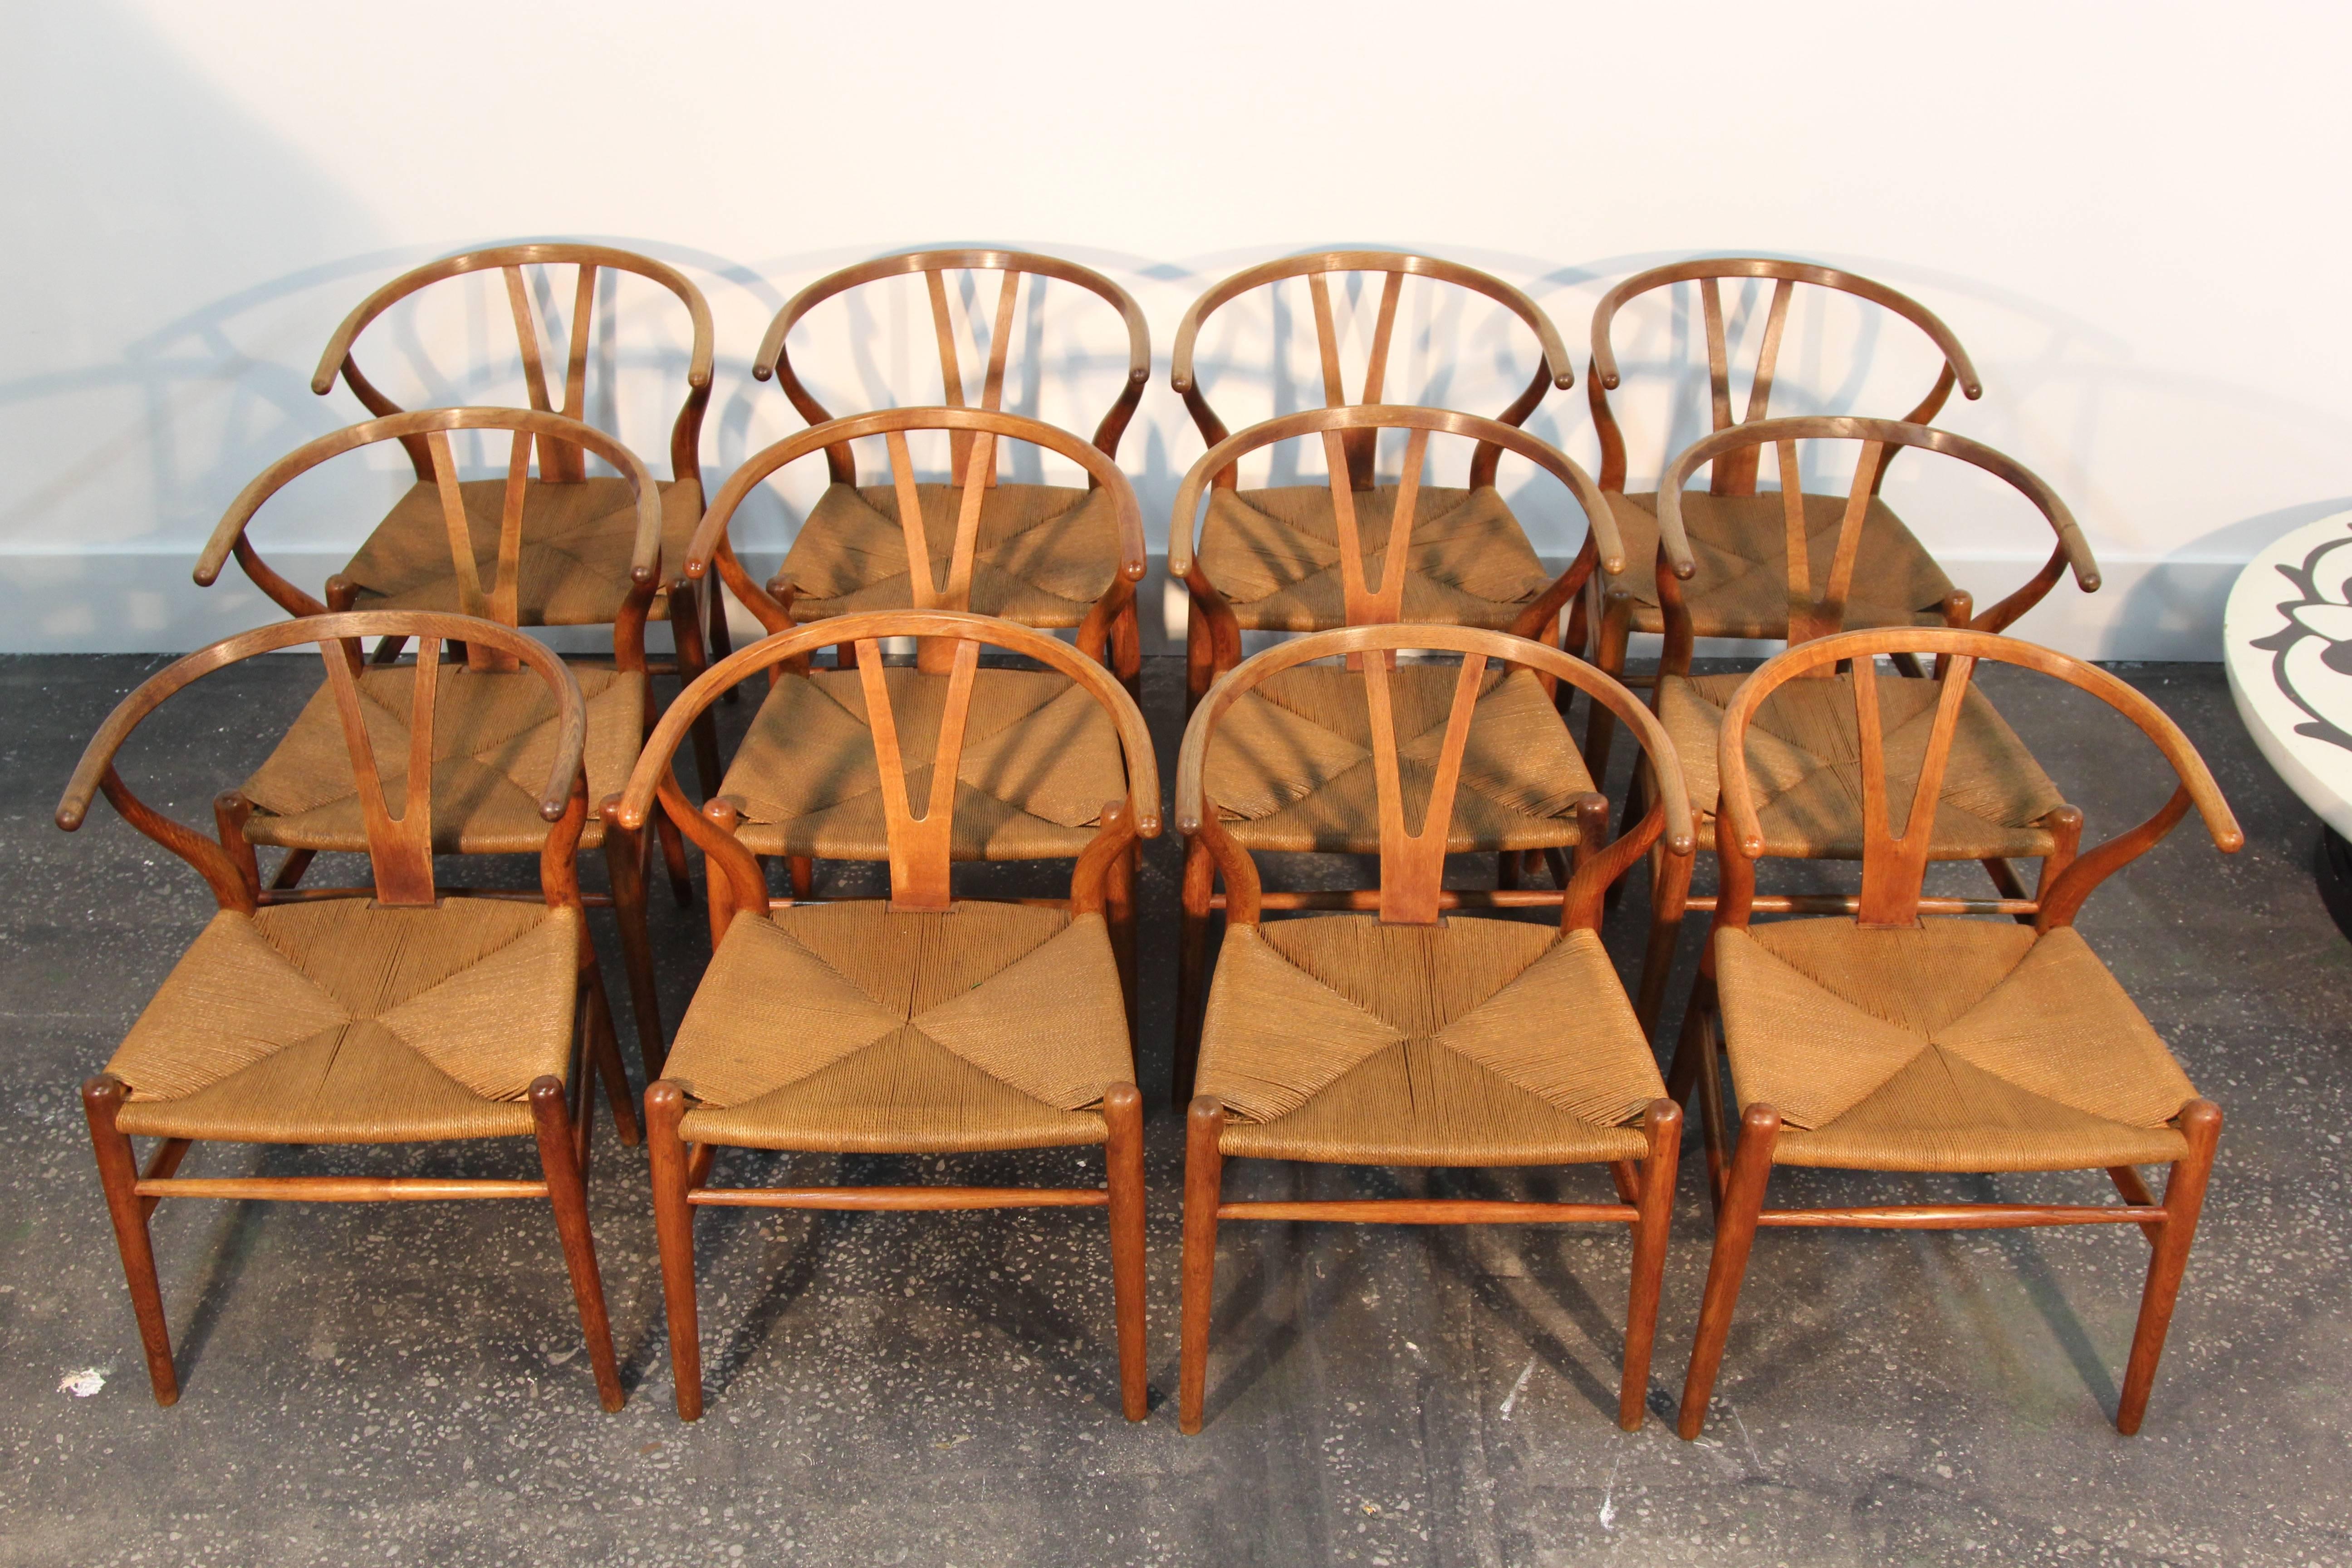 Very rarely will you find a matched set of 12 early original Hans Wegner Wishbone chairs. This set is incredible. They have been completely restored, all joints glued, wood polished and waxed. Seats stained to match perfectly and protect for future